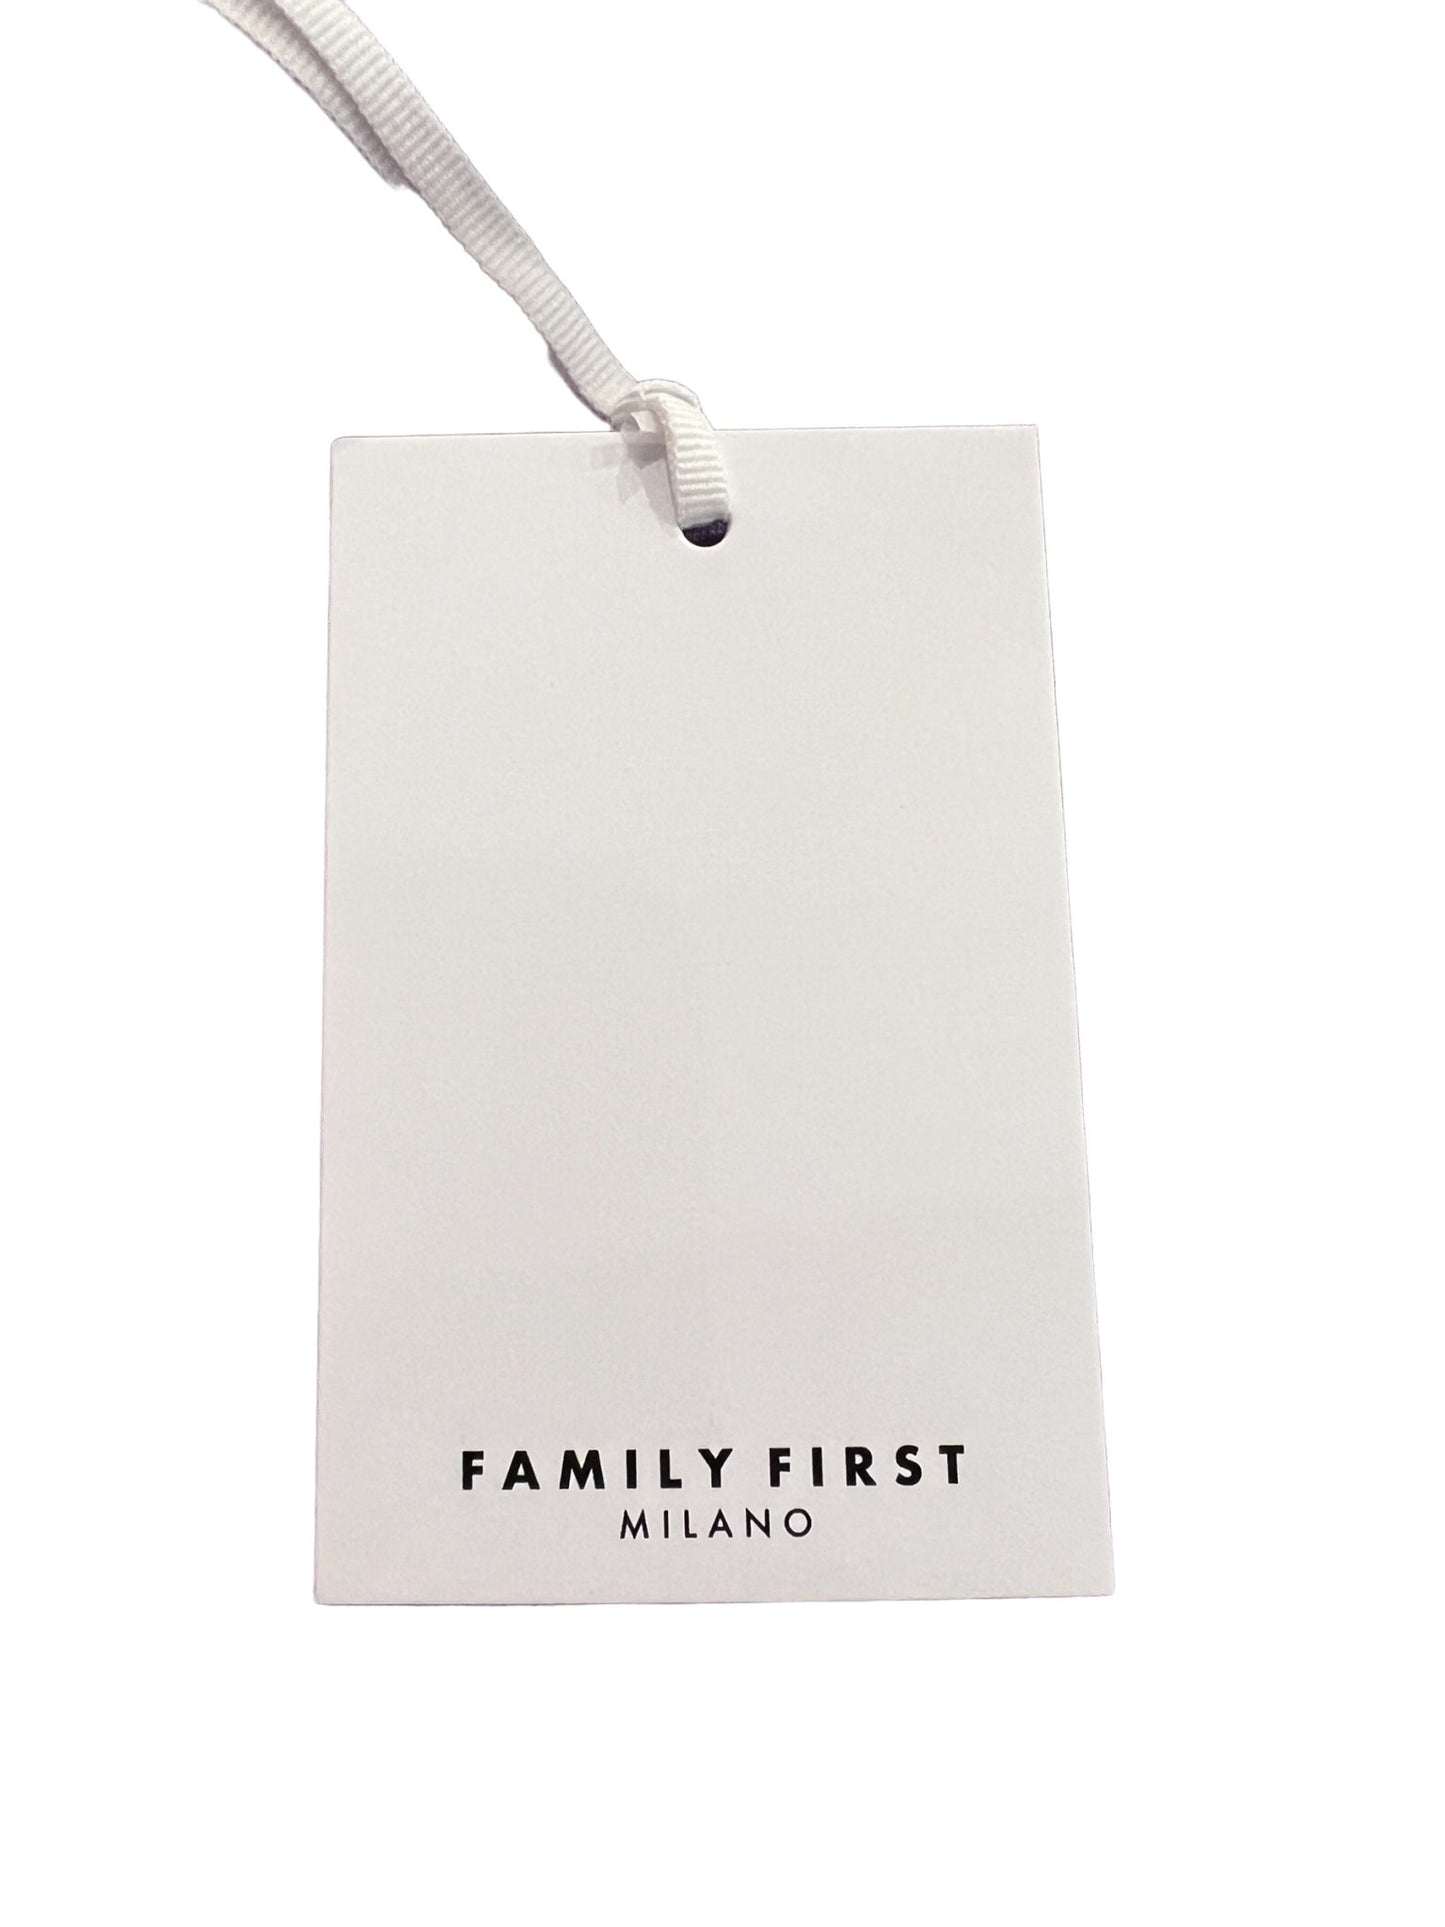 White tag with "FAMILY FIRST JOSS2403 JOGGER SHORT JACQUARD DB" printed in navy blue, suspended by a white string on a plain background.